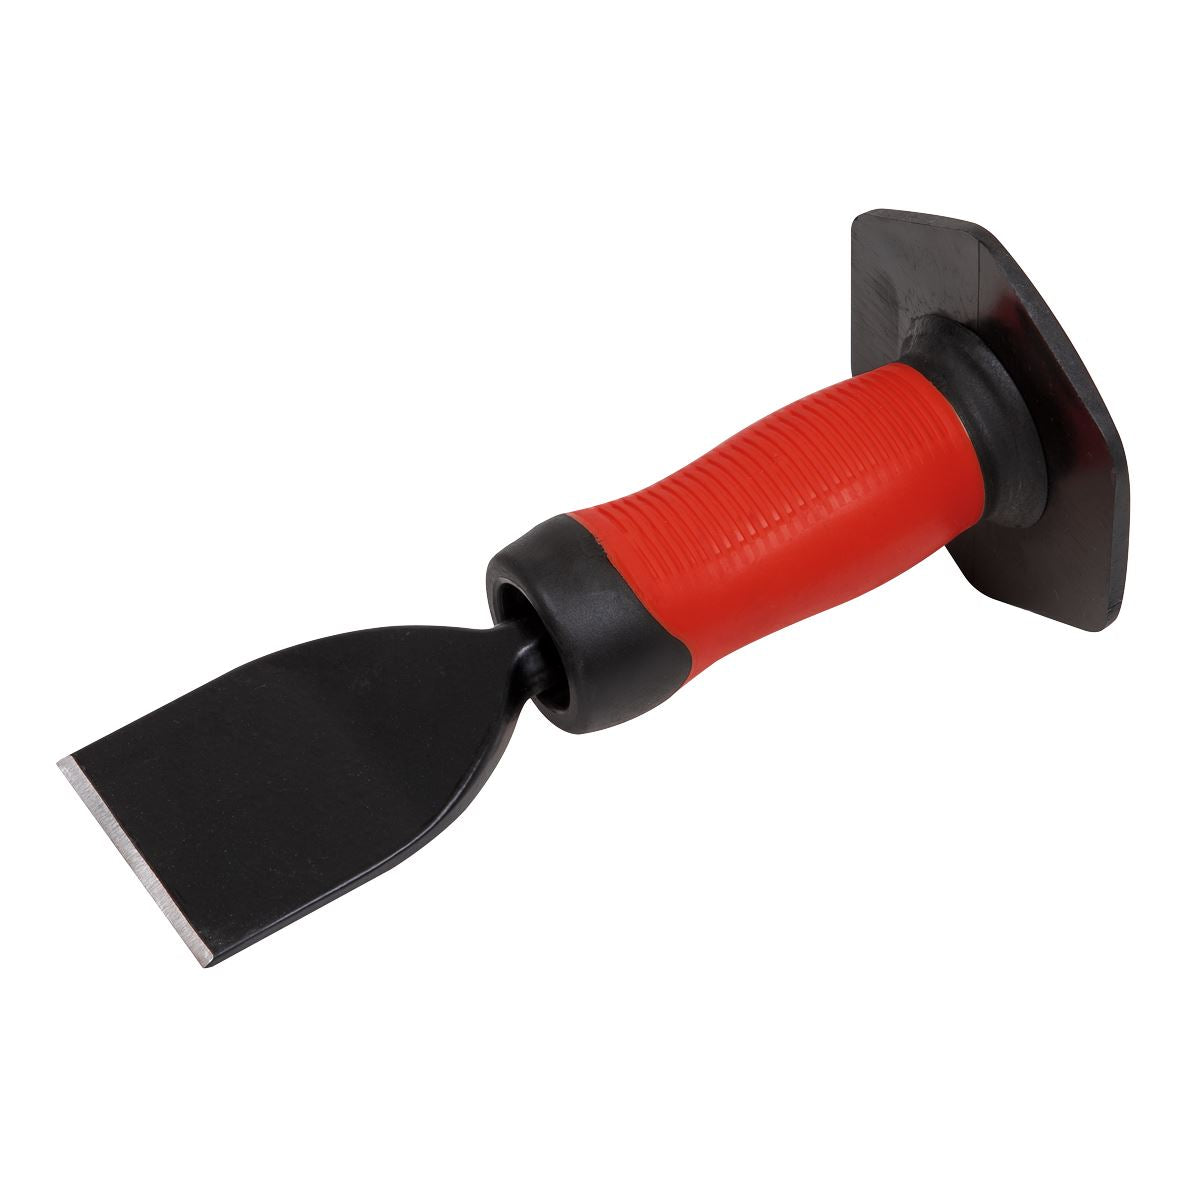 Sealey Electrician's Bolster with Grip 57 x 225mm